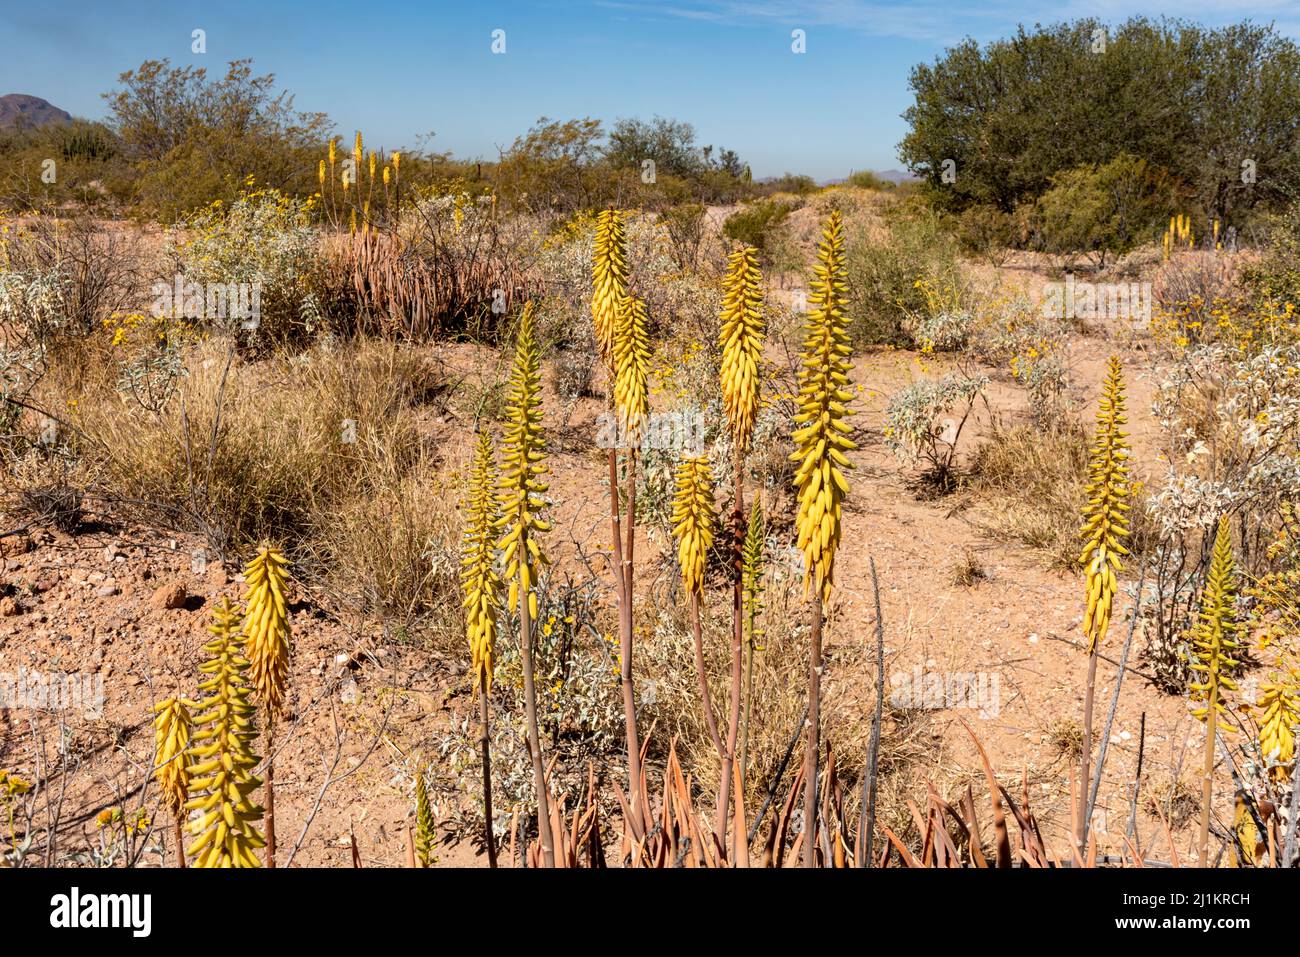 Sonoran desert landscape with yellow flowers of an aloe plant in the foreground. Stock Photo